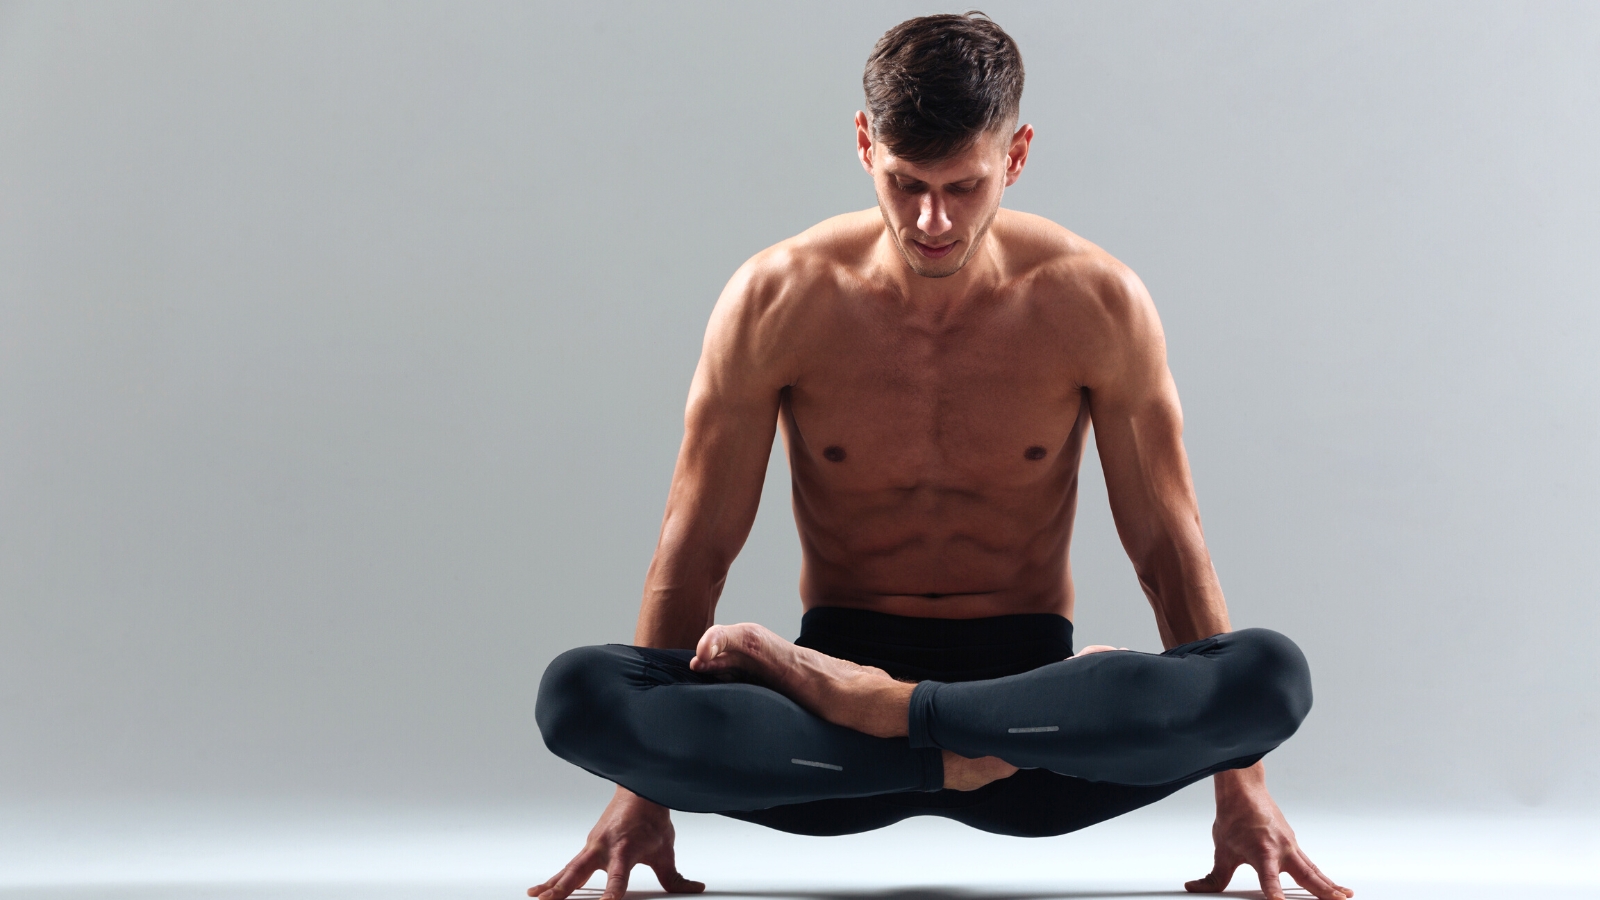 What Yoga Pose Are You Based on Your Enneagram? — Alo Moves